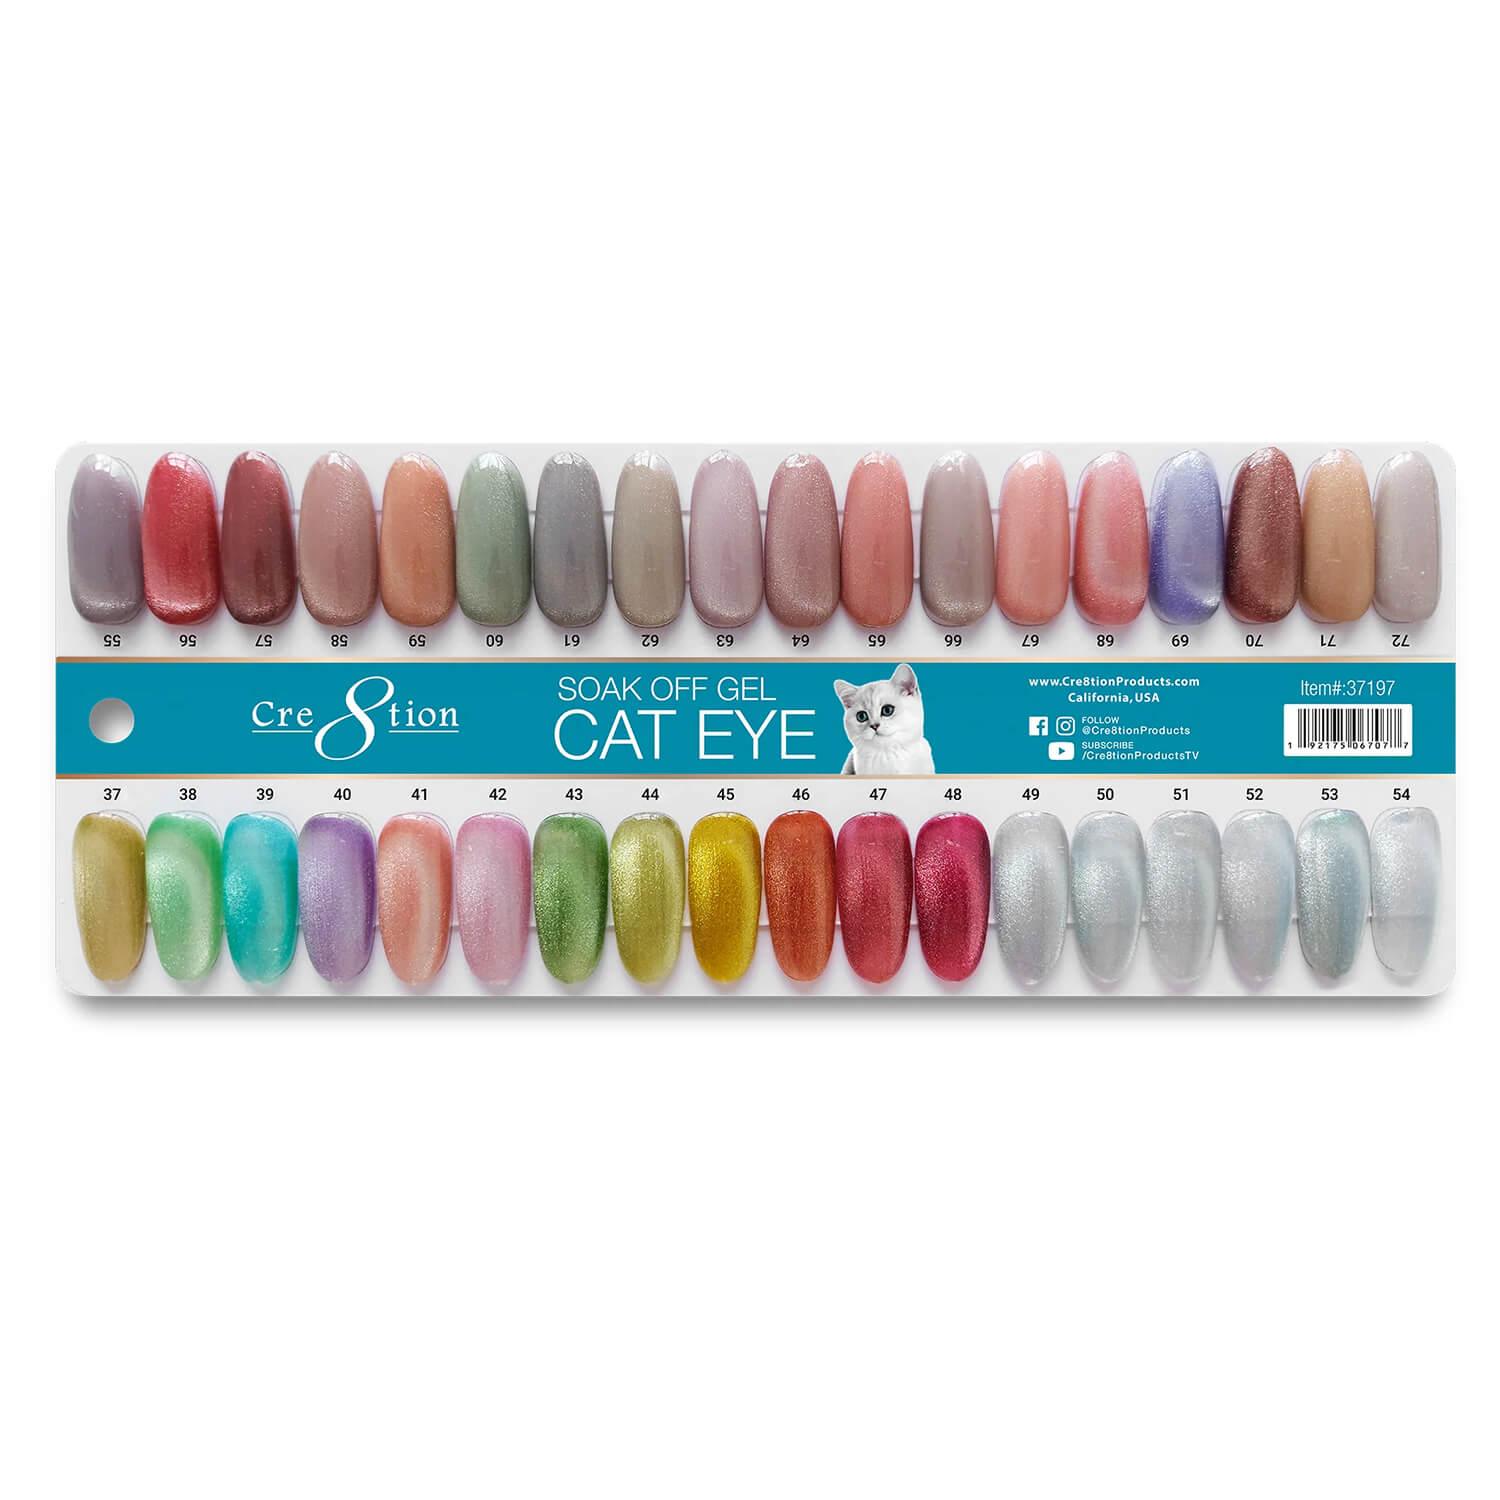 Cre8tion Gel Cat Eye 0.5 Oz (Pack of 36 Colors) #37 --> #72 + Color Chart